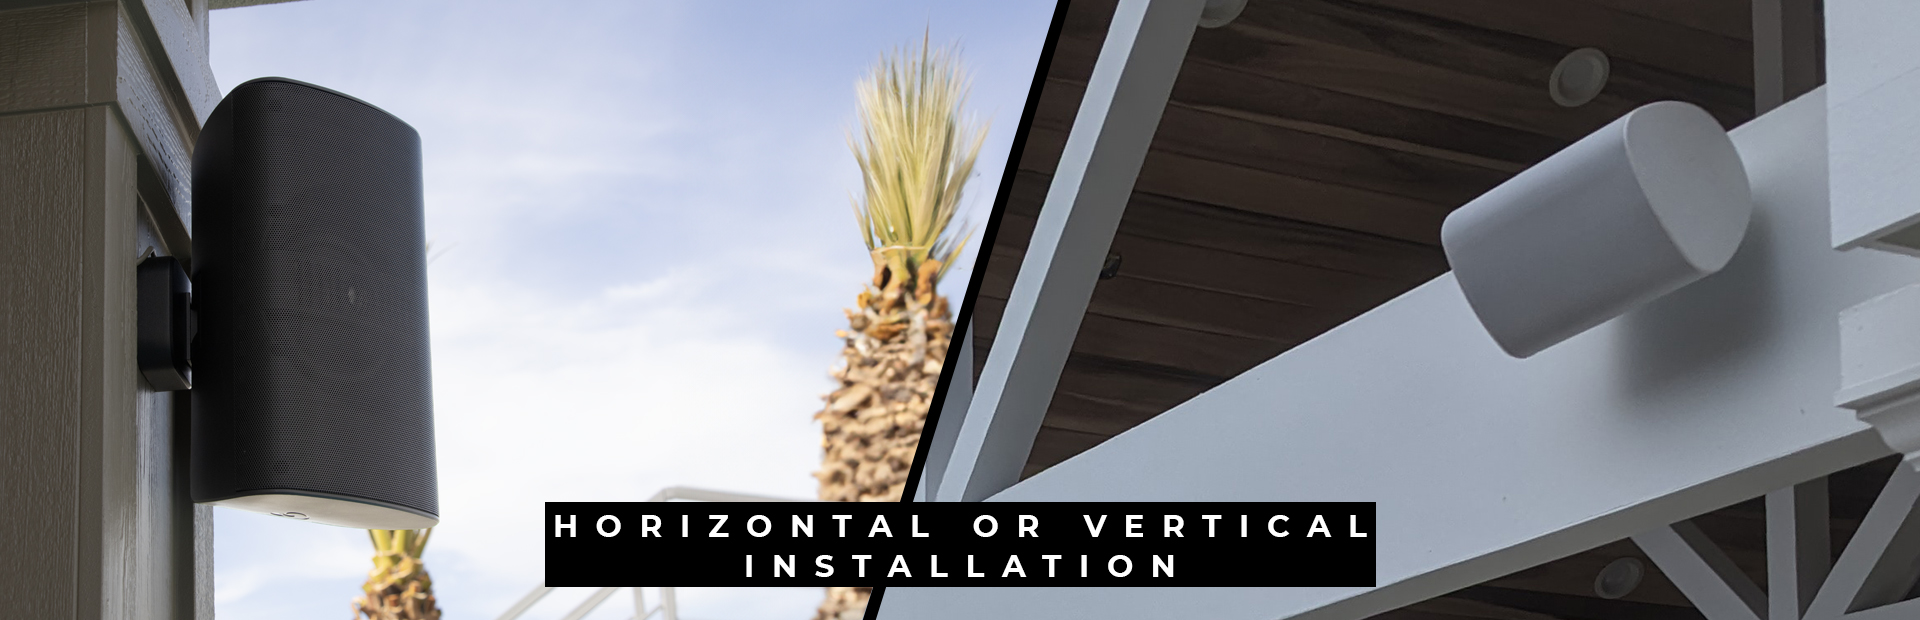 Vertical or horizontal mounting options